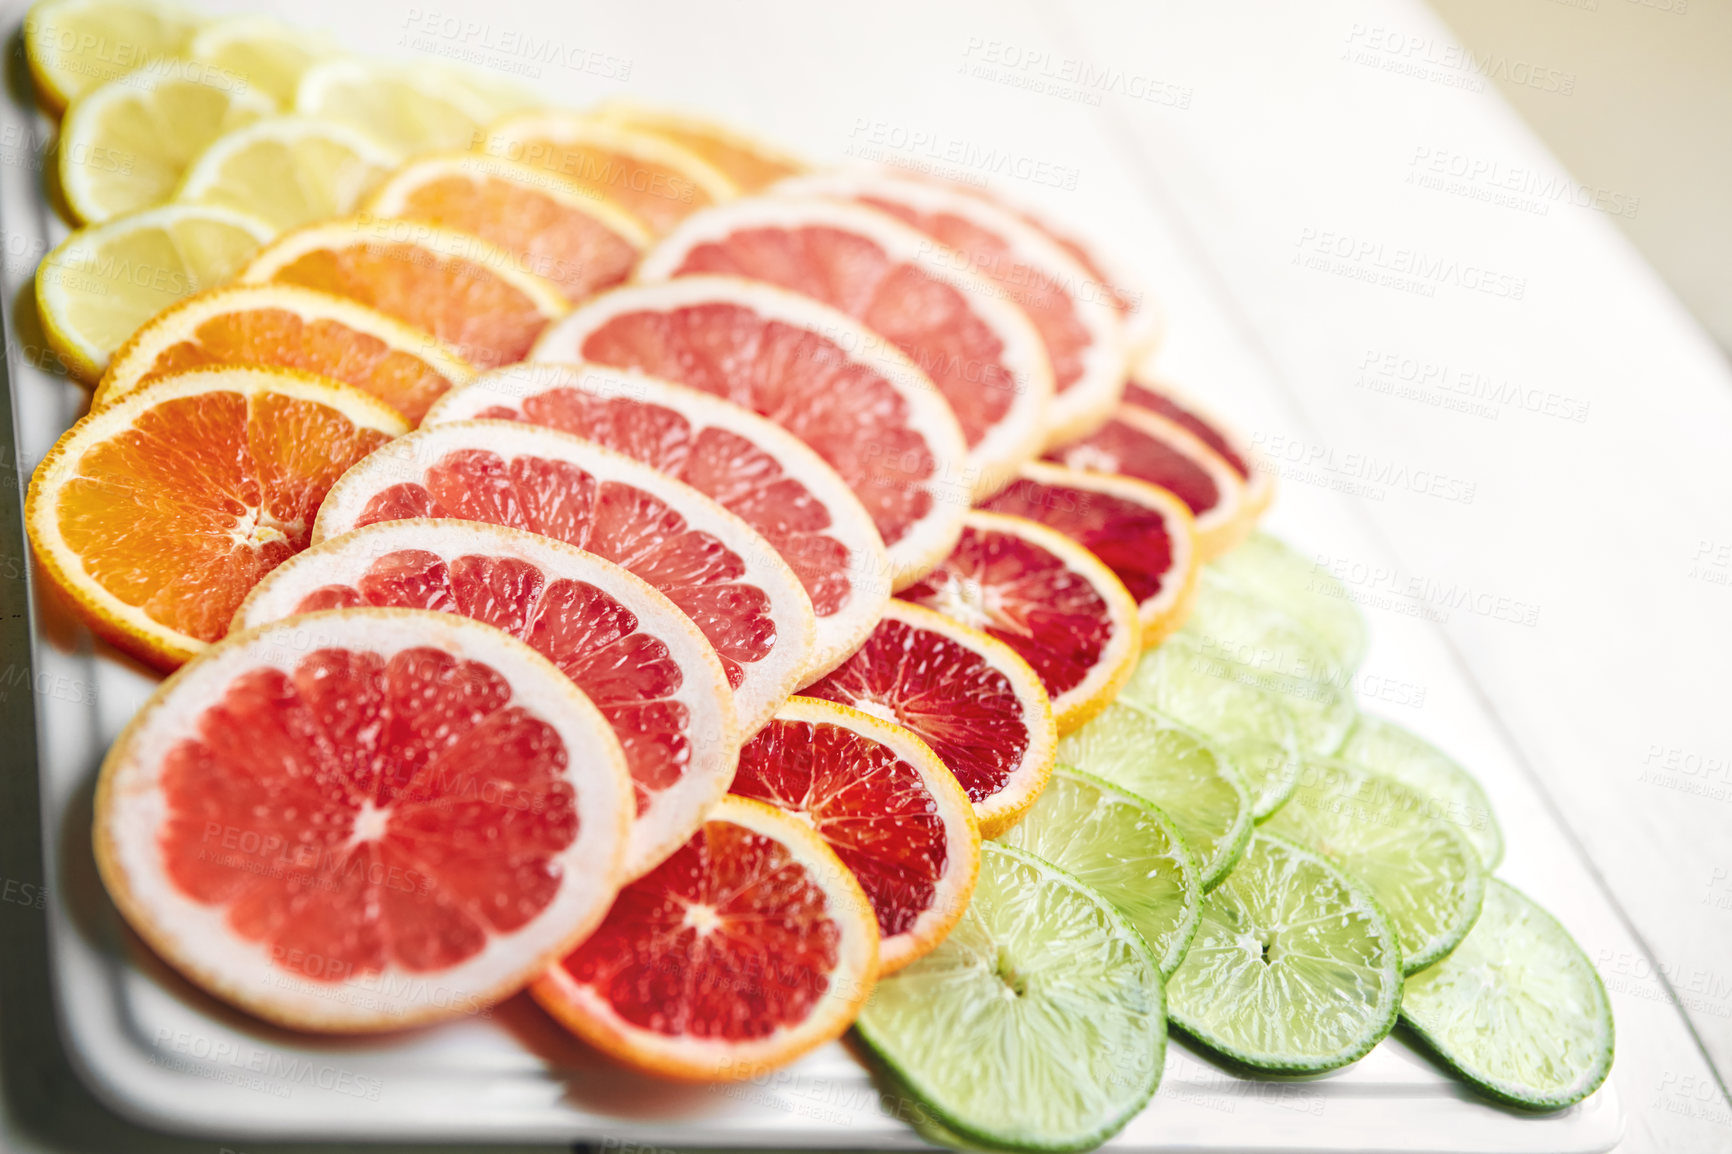 Buy stock photo Shot of a variety of citrus fruits cut into slices on a plate